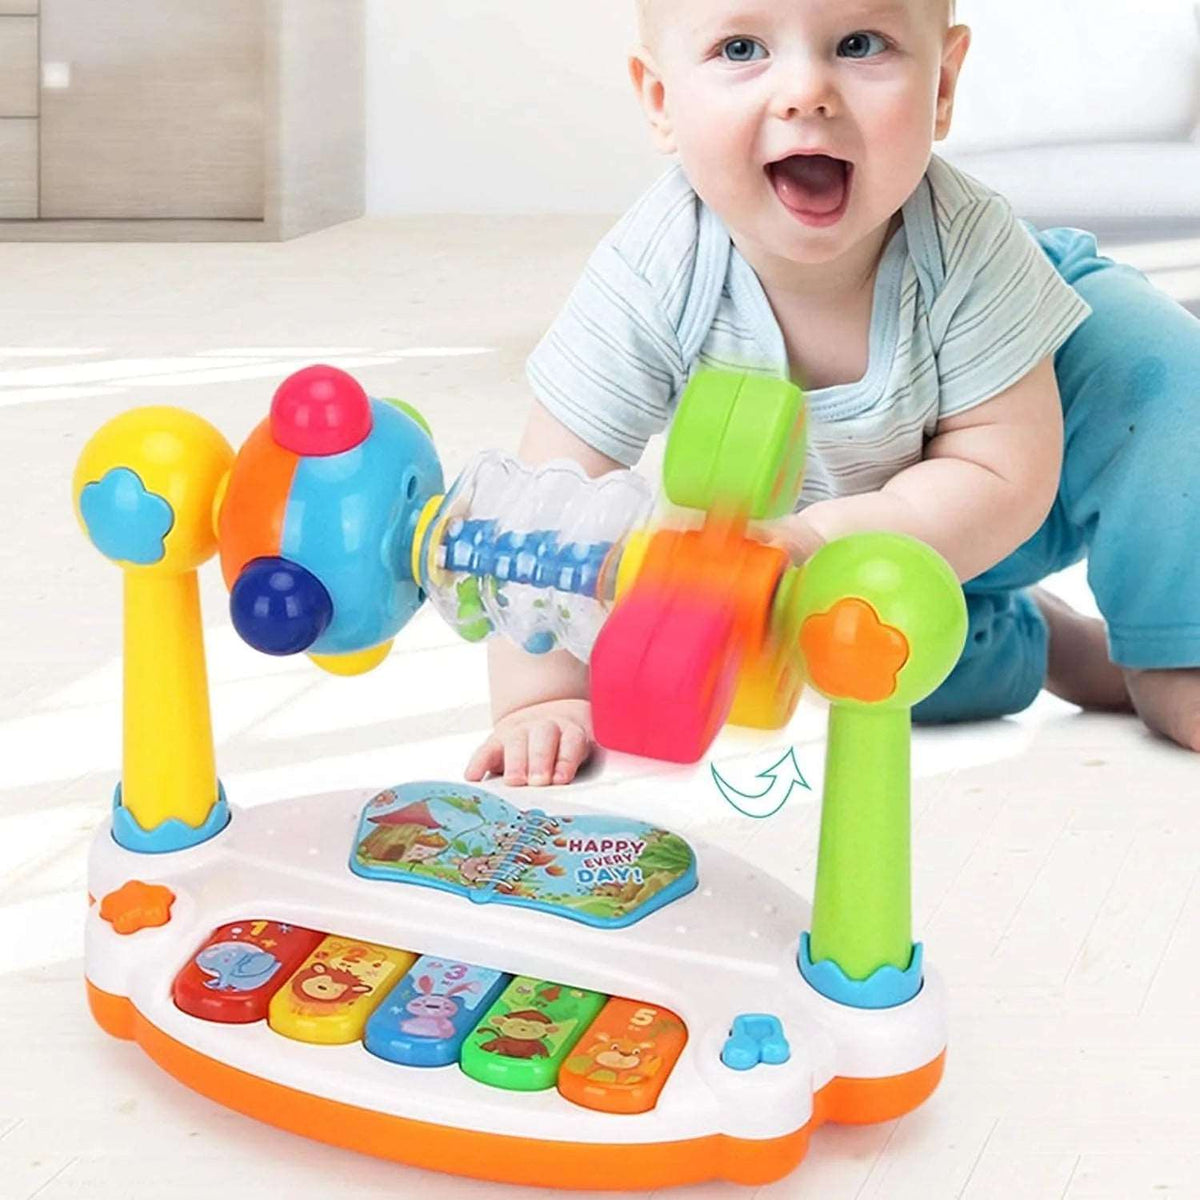 Baby Piano Toys Kids Rotating Music Piano Keyboard with Light Sound - Kids Musical Education